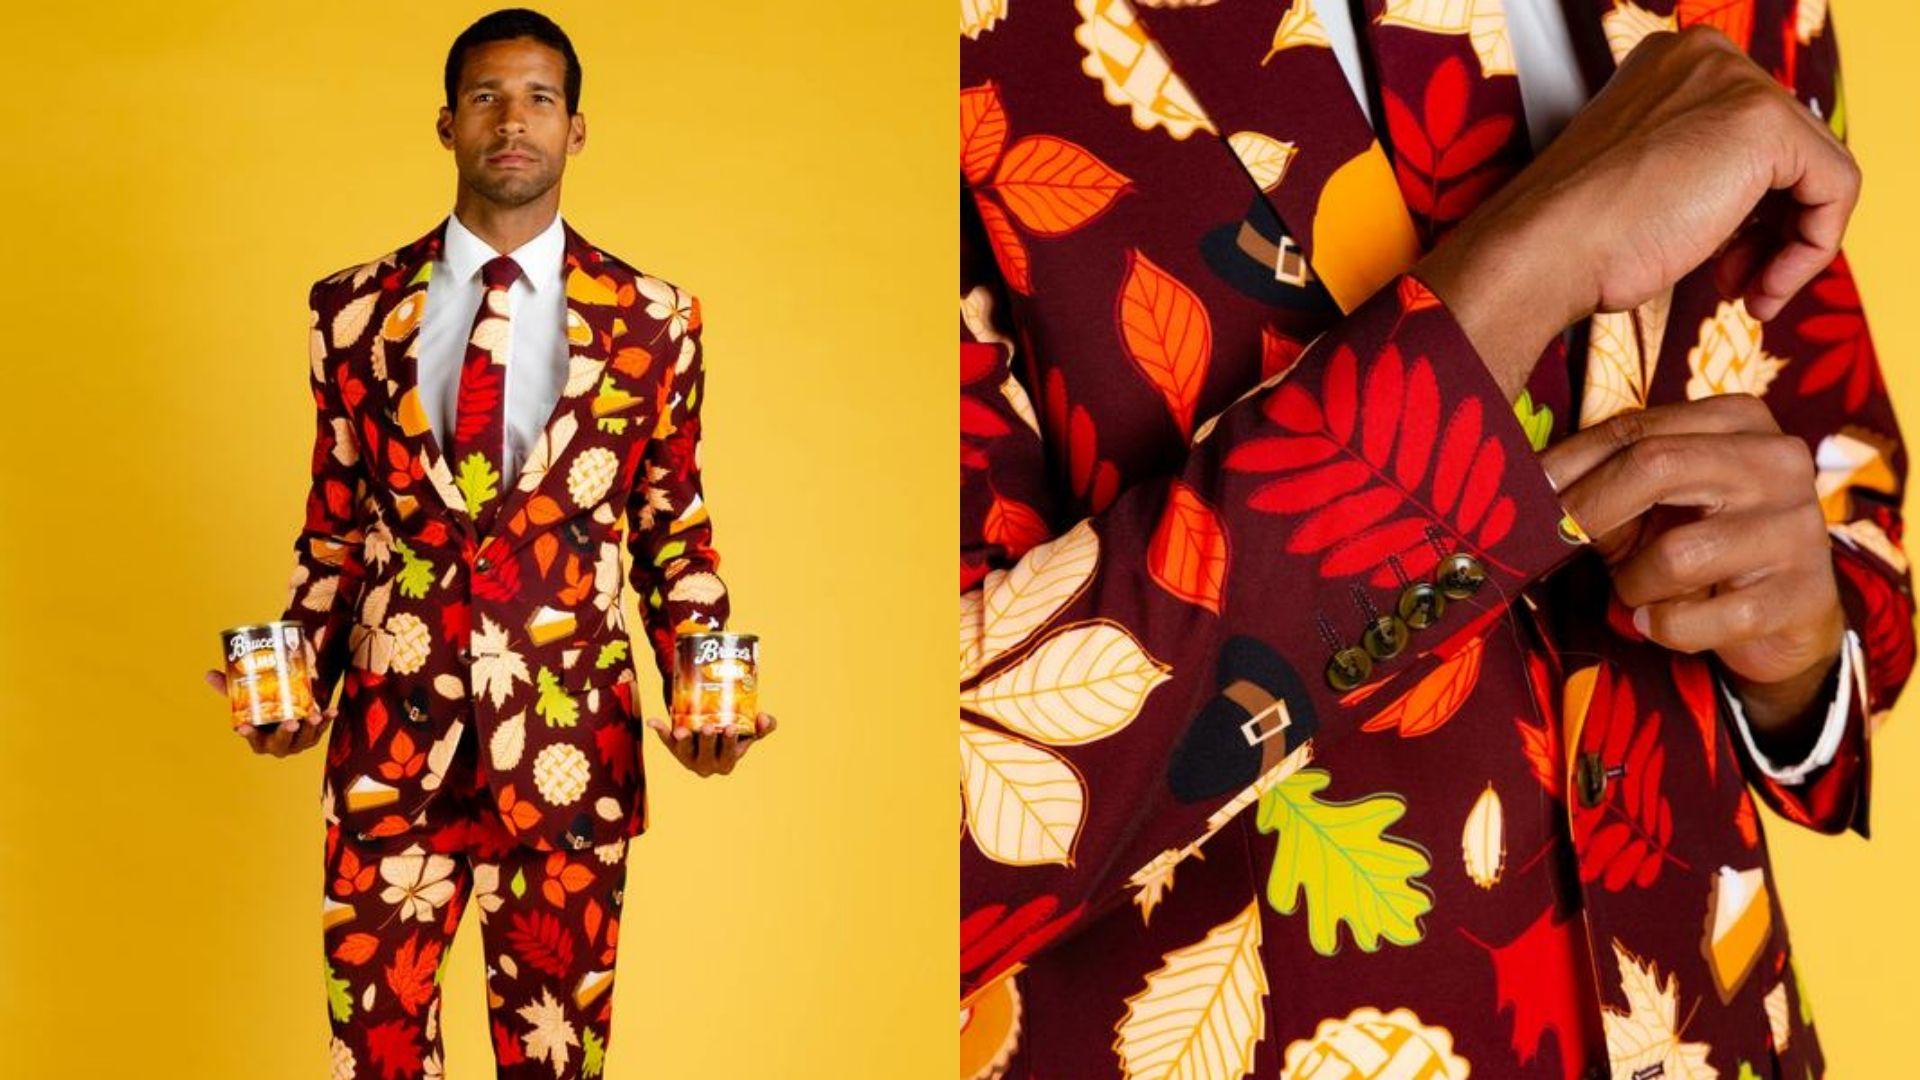 Move over Turkey, this Men's Thanksgiving Suit Will be the Talk of the Table This Year.